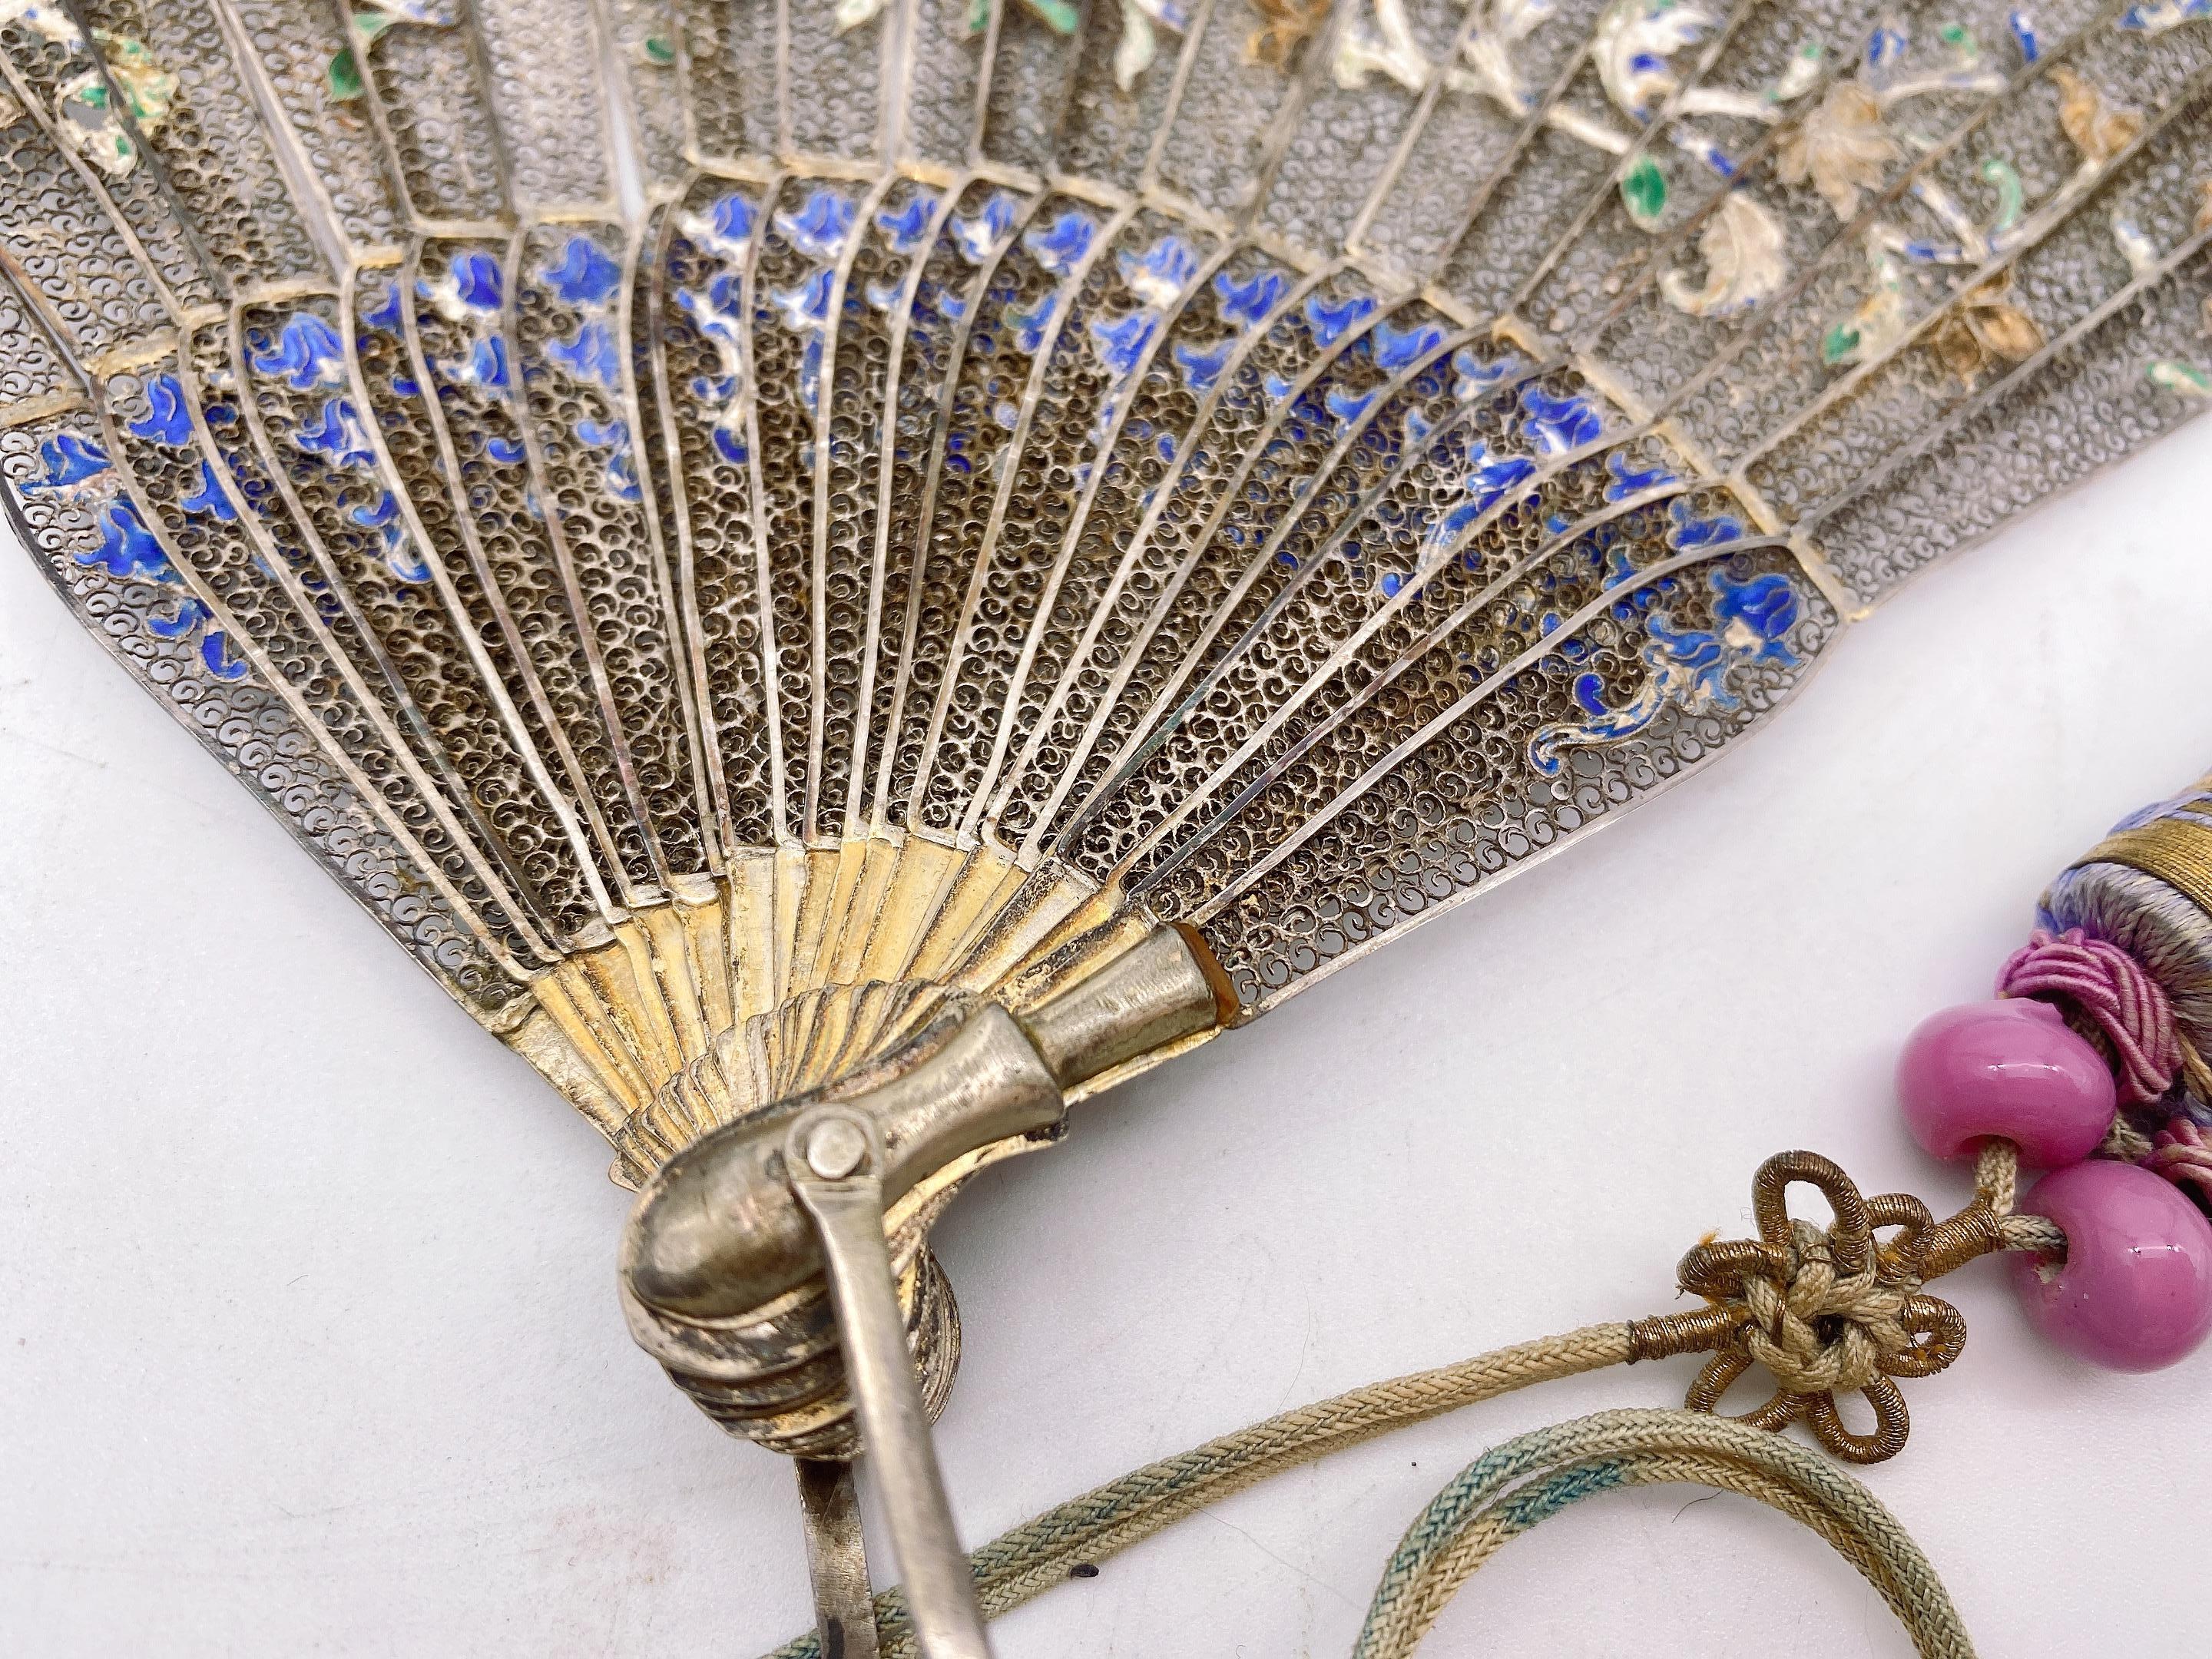 Rare Antique  Qing Dynasty Chinese Gilt Silver Filigree And Enamel Brise Fan For Sale 9